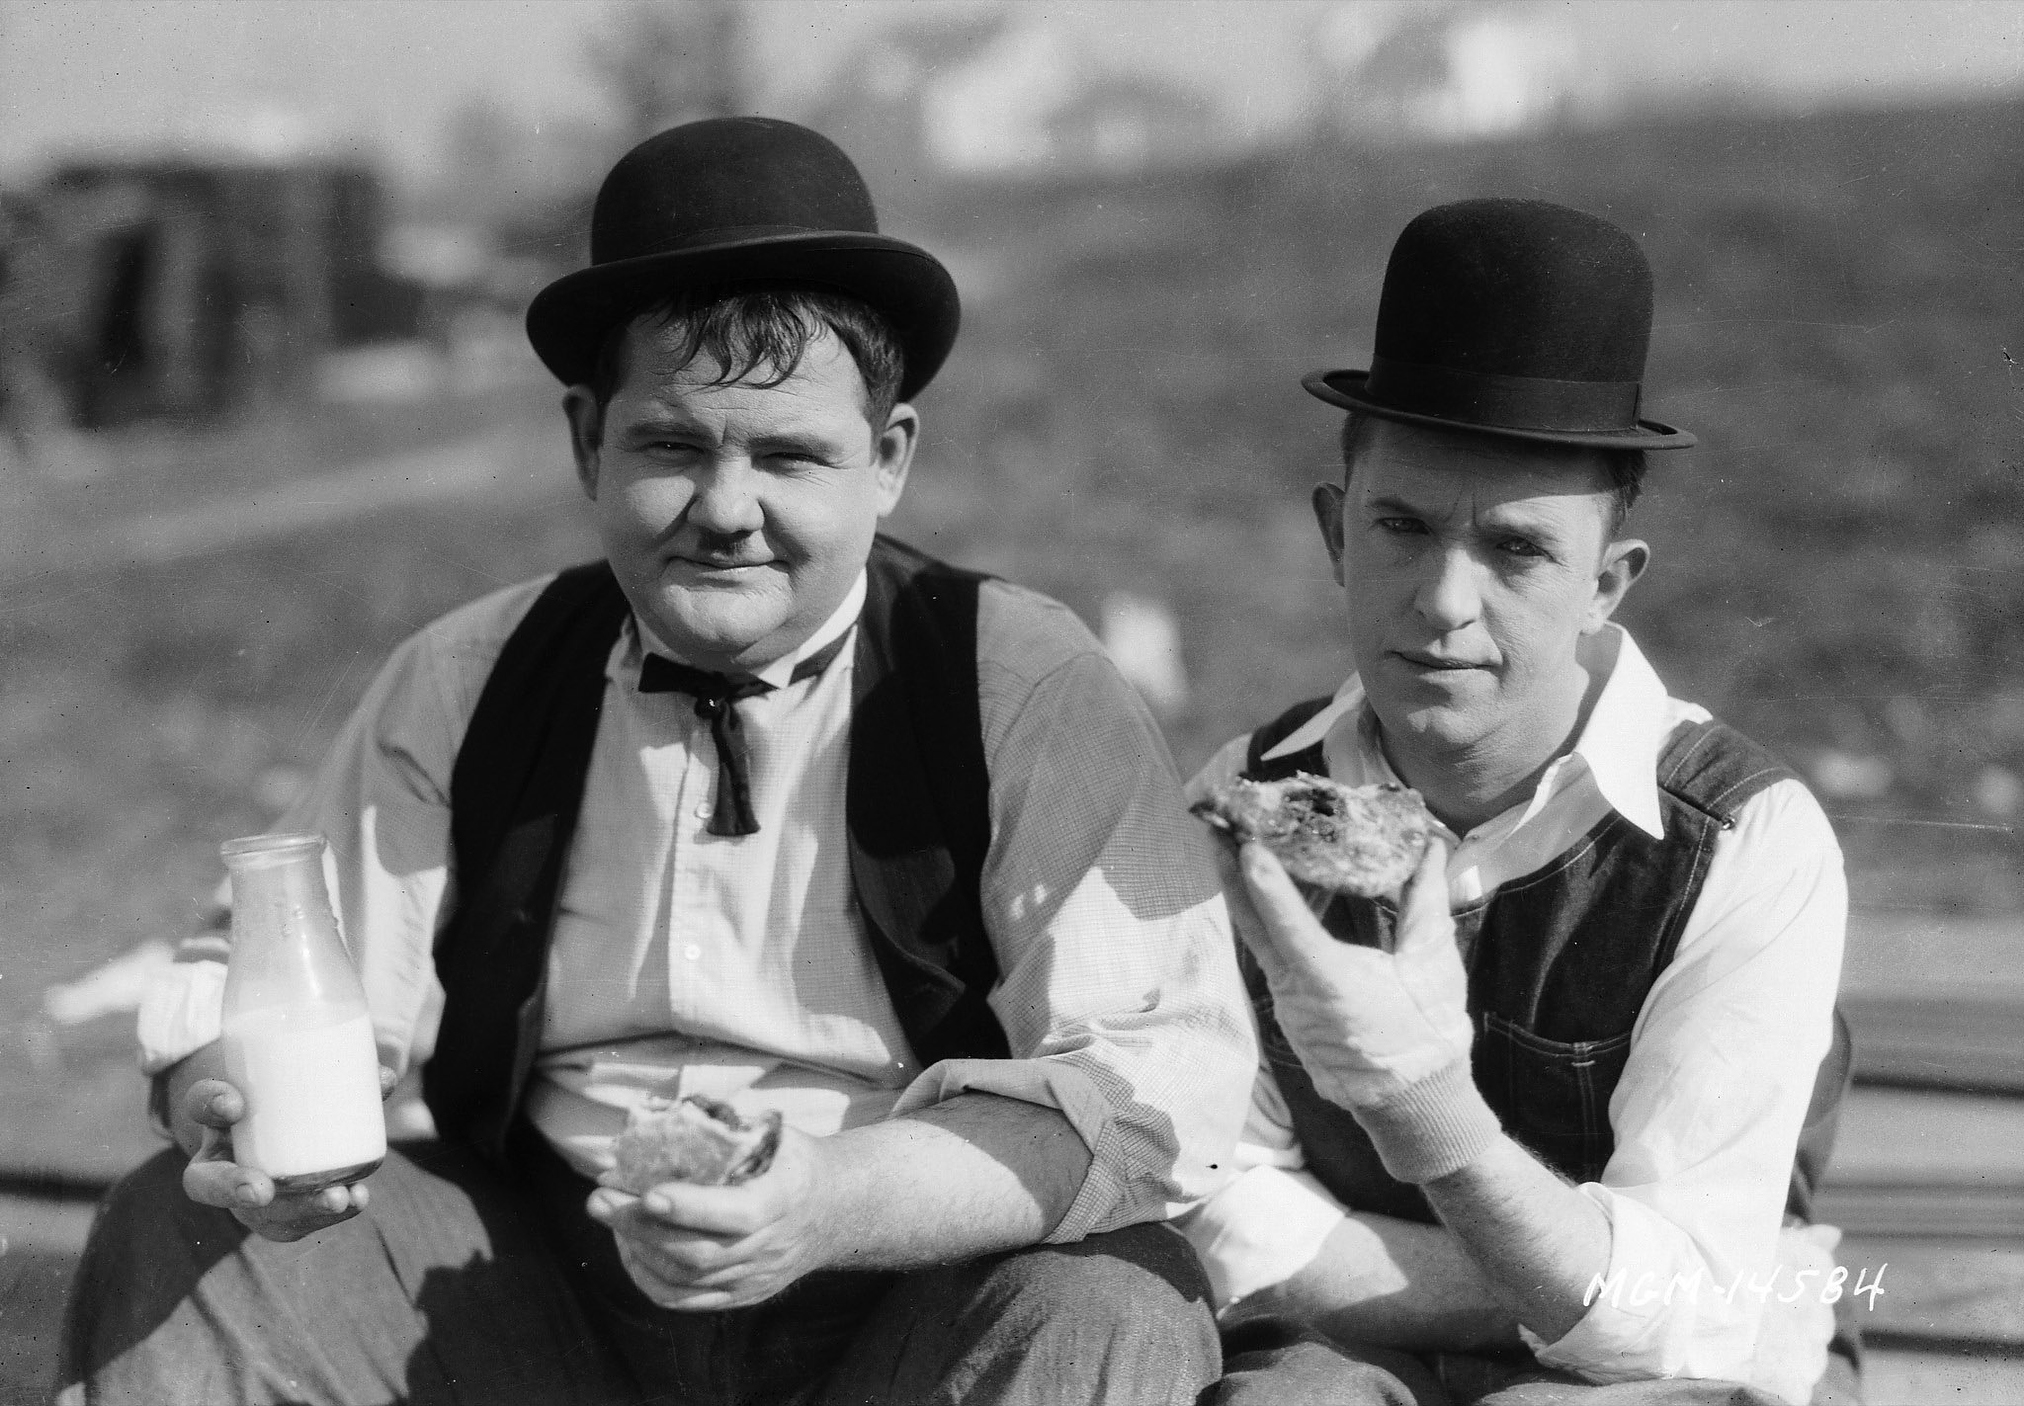 laurel and hardy uk tours